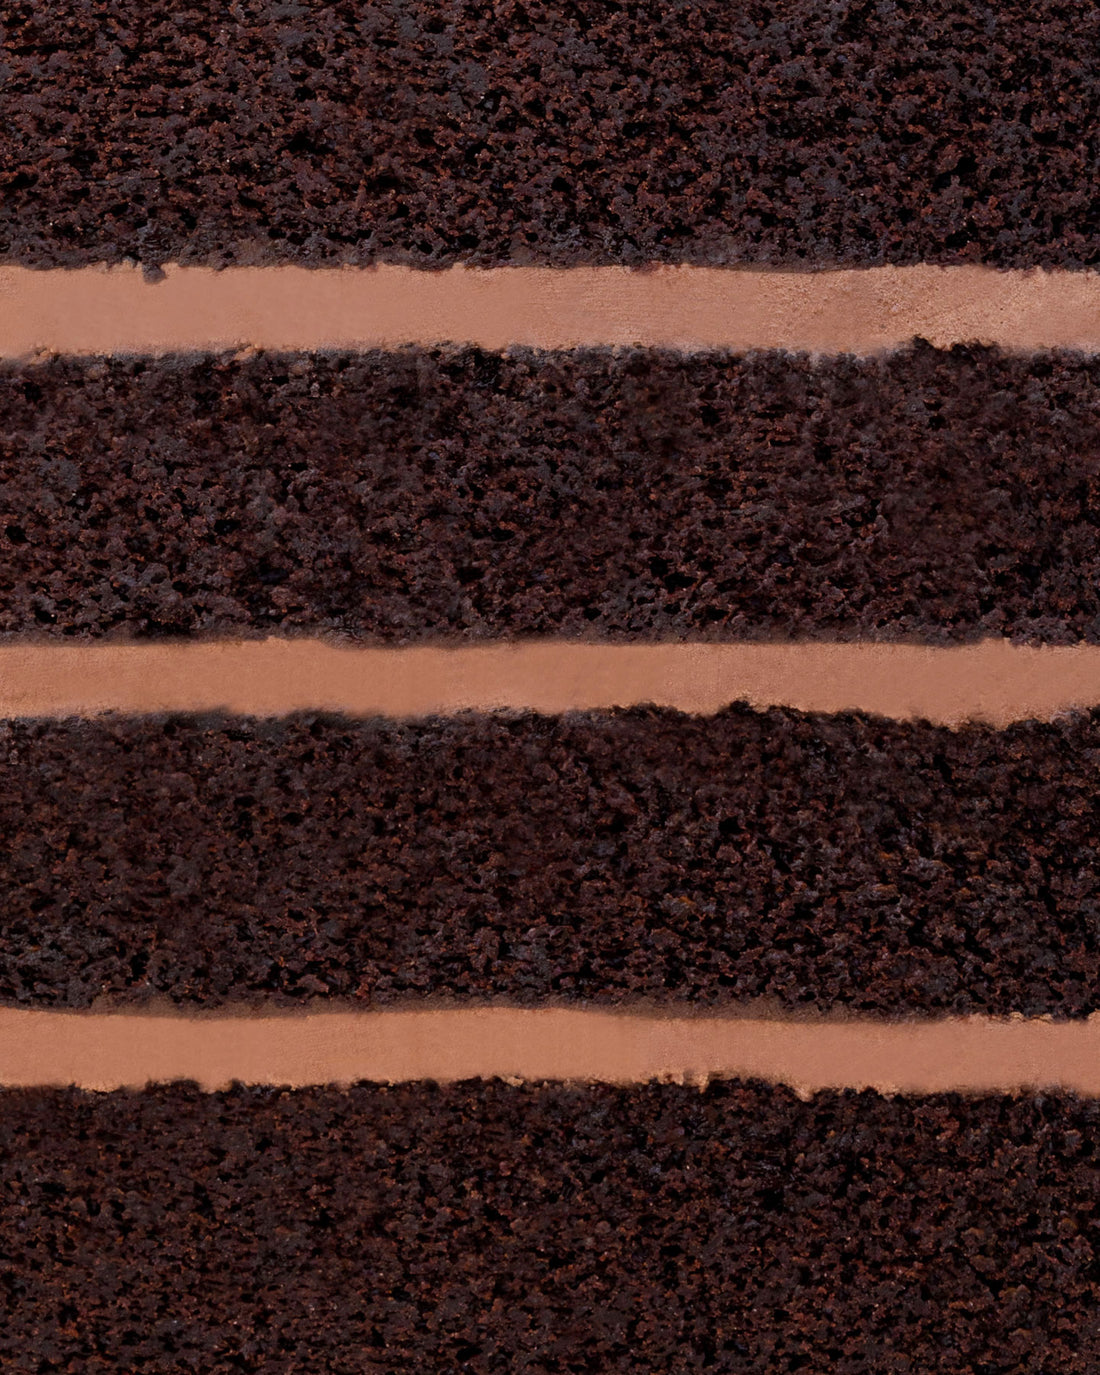 CHocolate Sponge Cake Background. Colorful Seamless Texture. Royalty Free  SVG, Cliparts, Vectors, and Stock Illustration. Image 69596670.